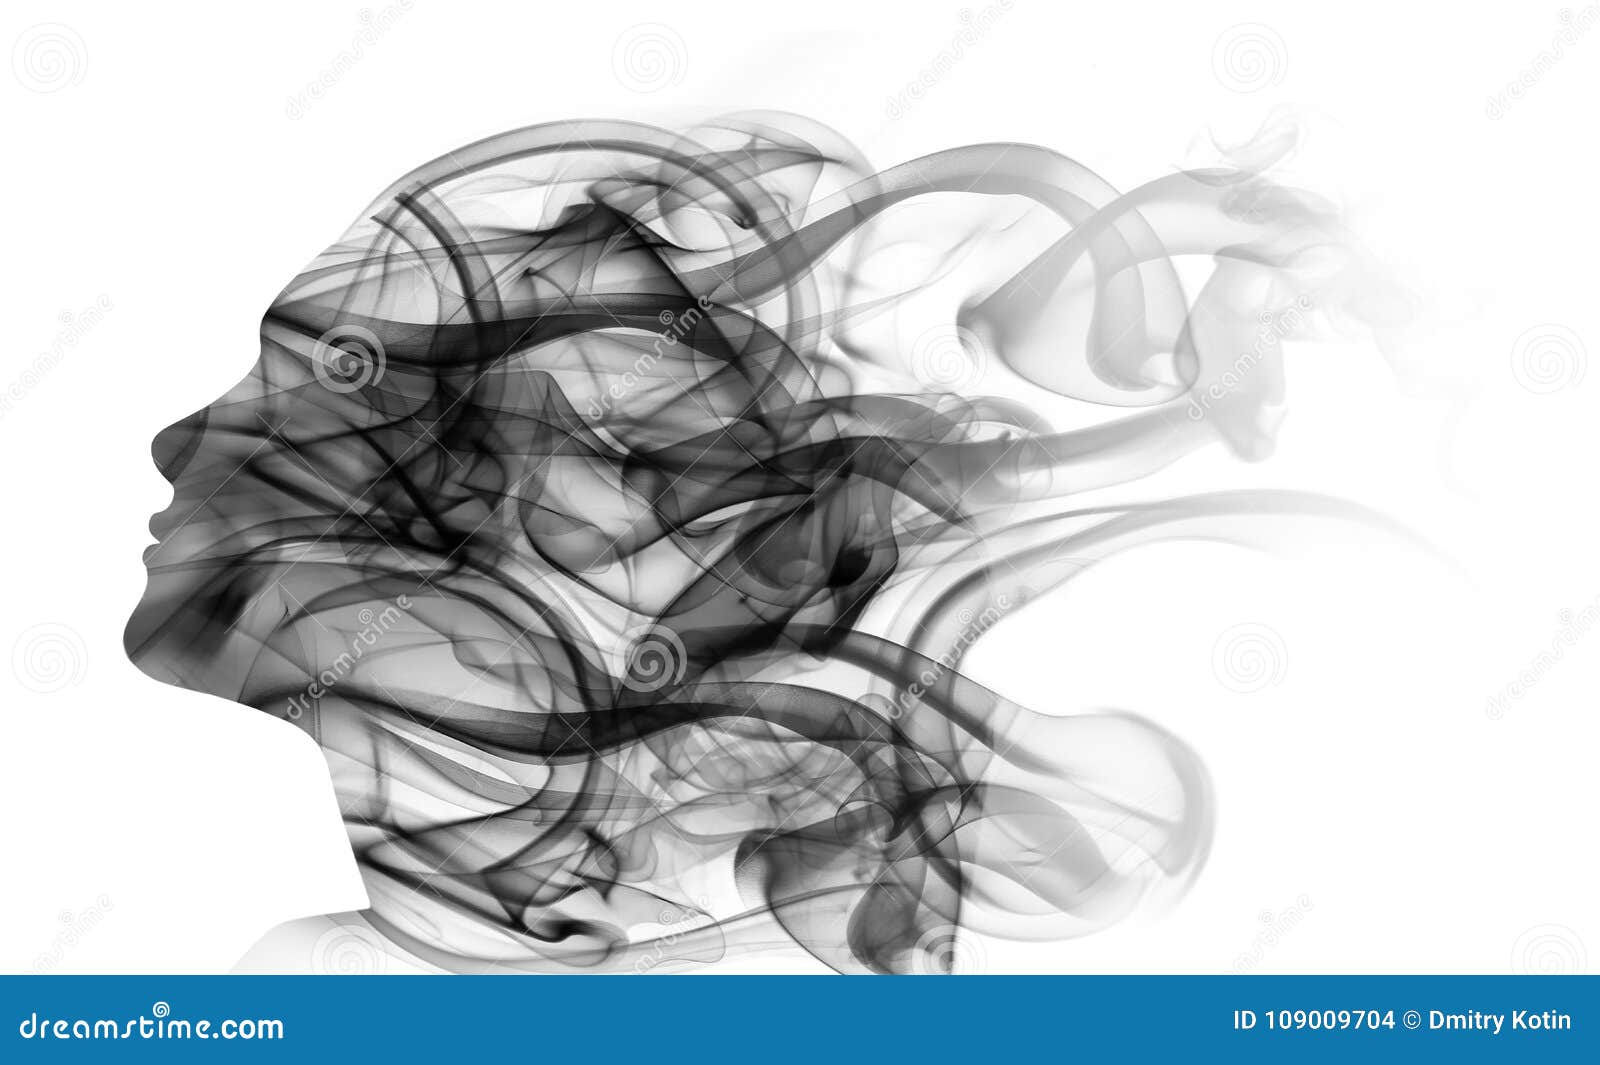 double exposure portrait of woman and smoke.